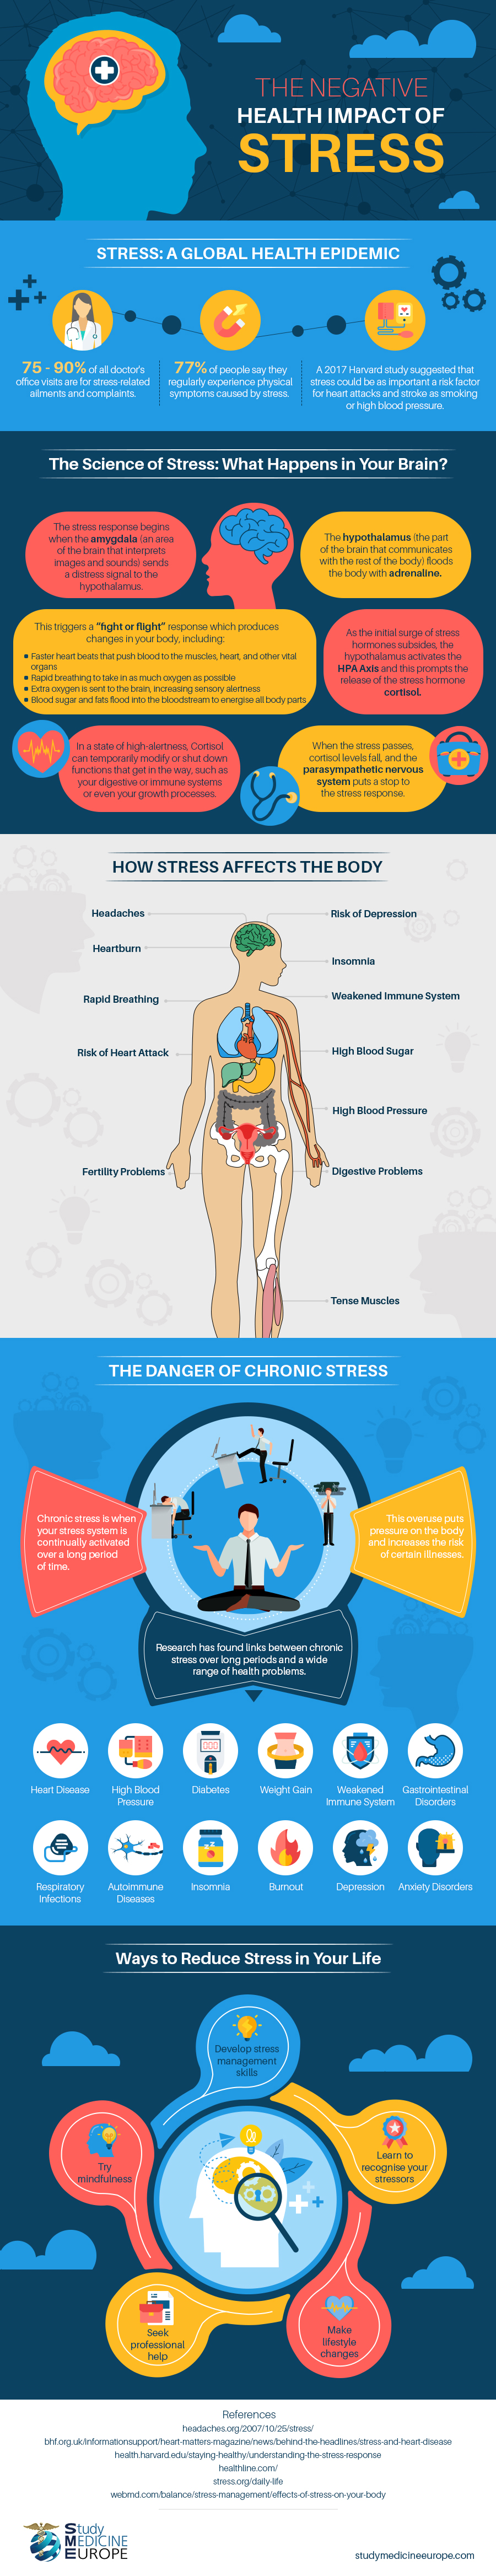 The negative impact of stress